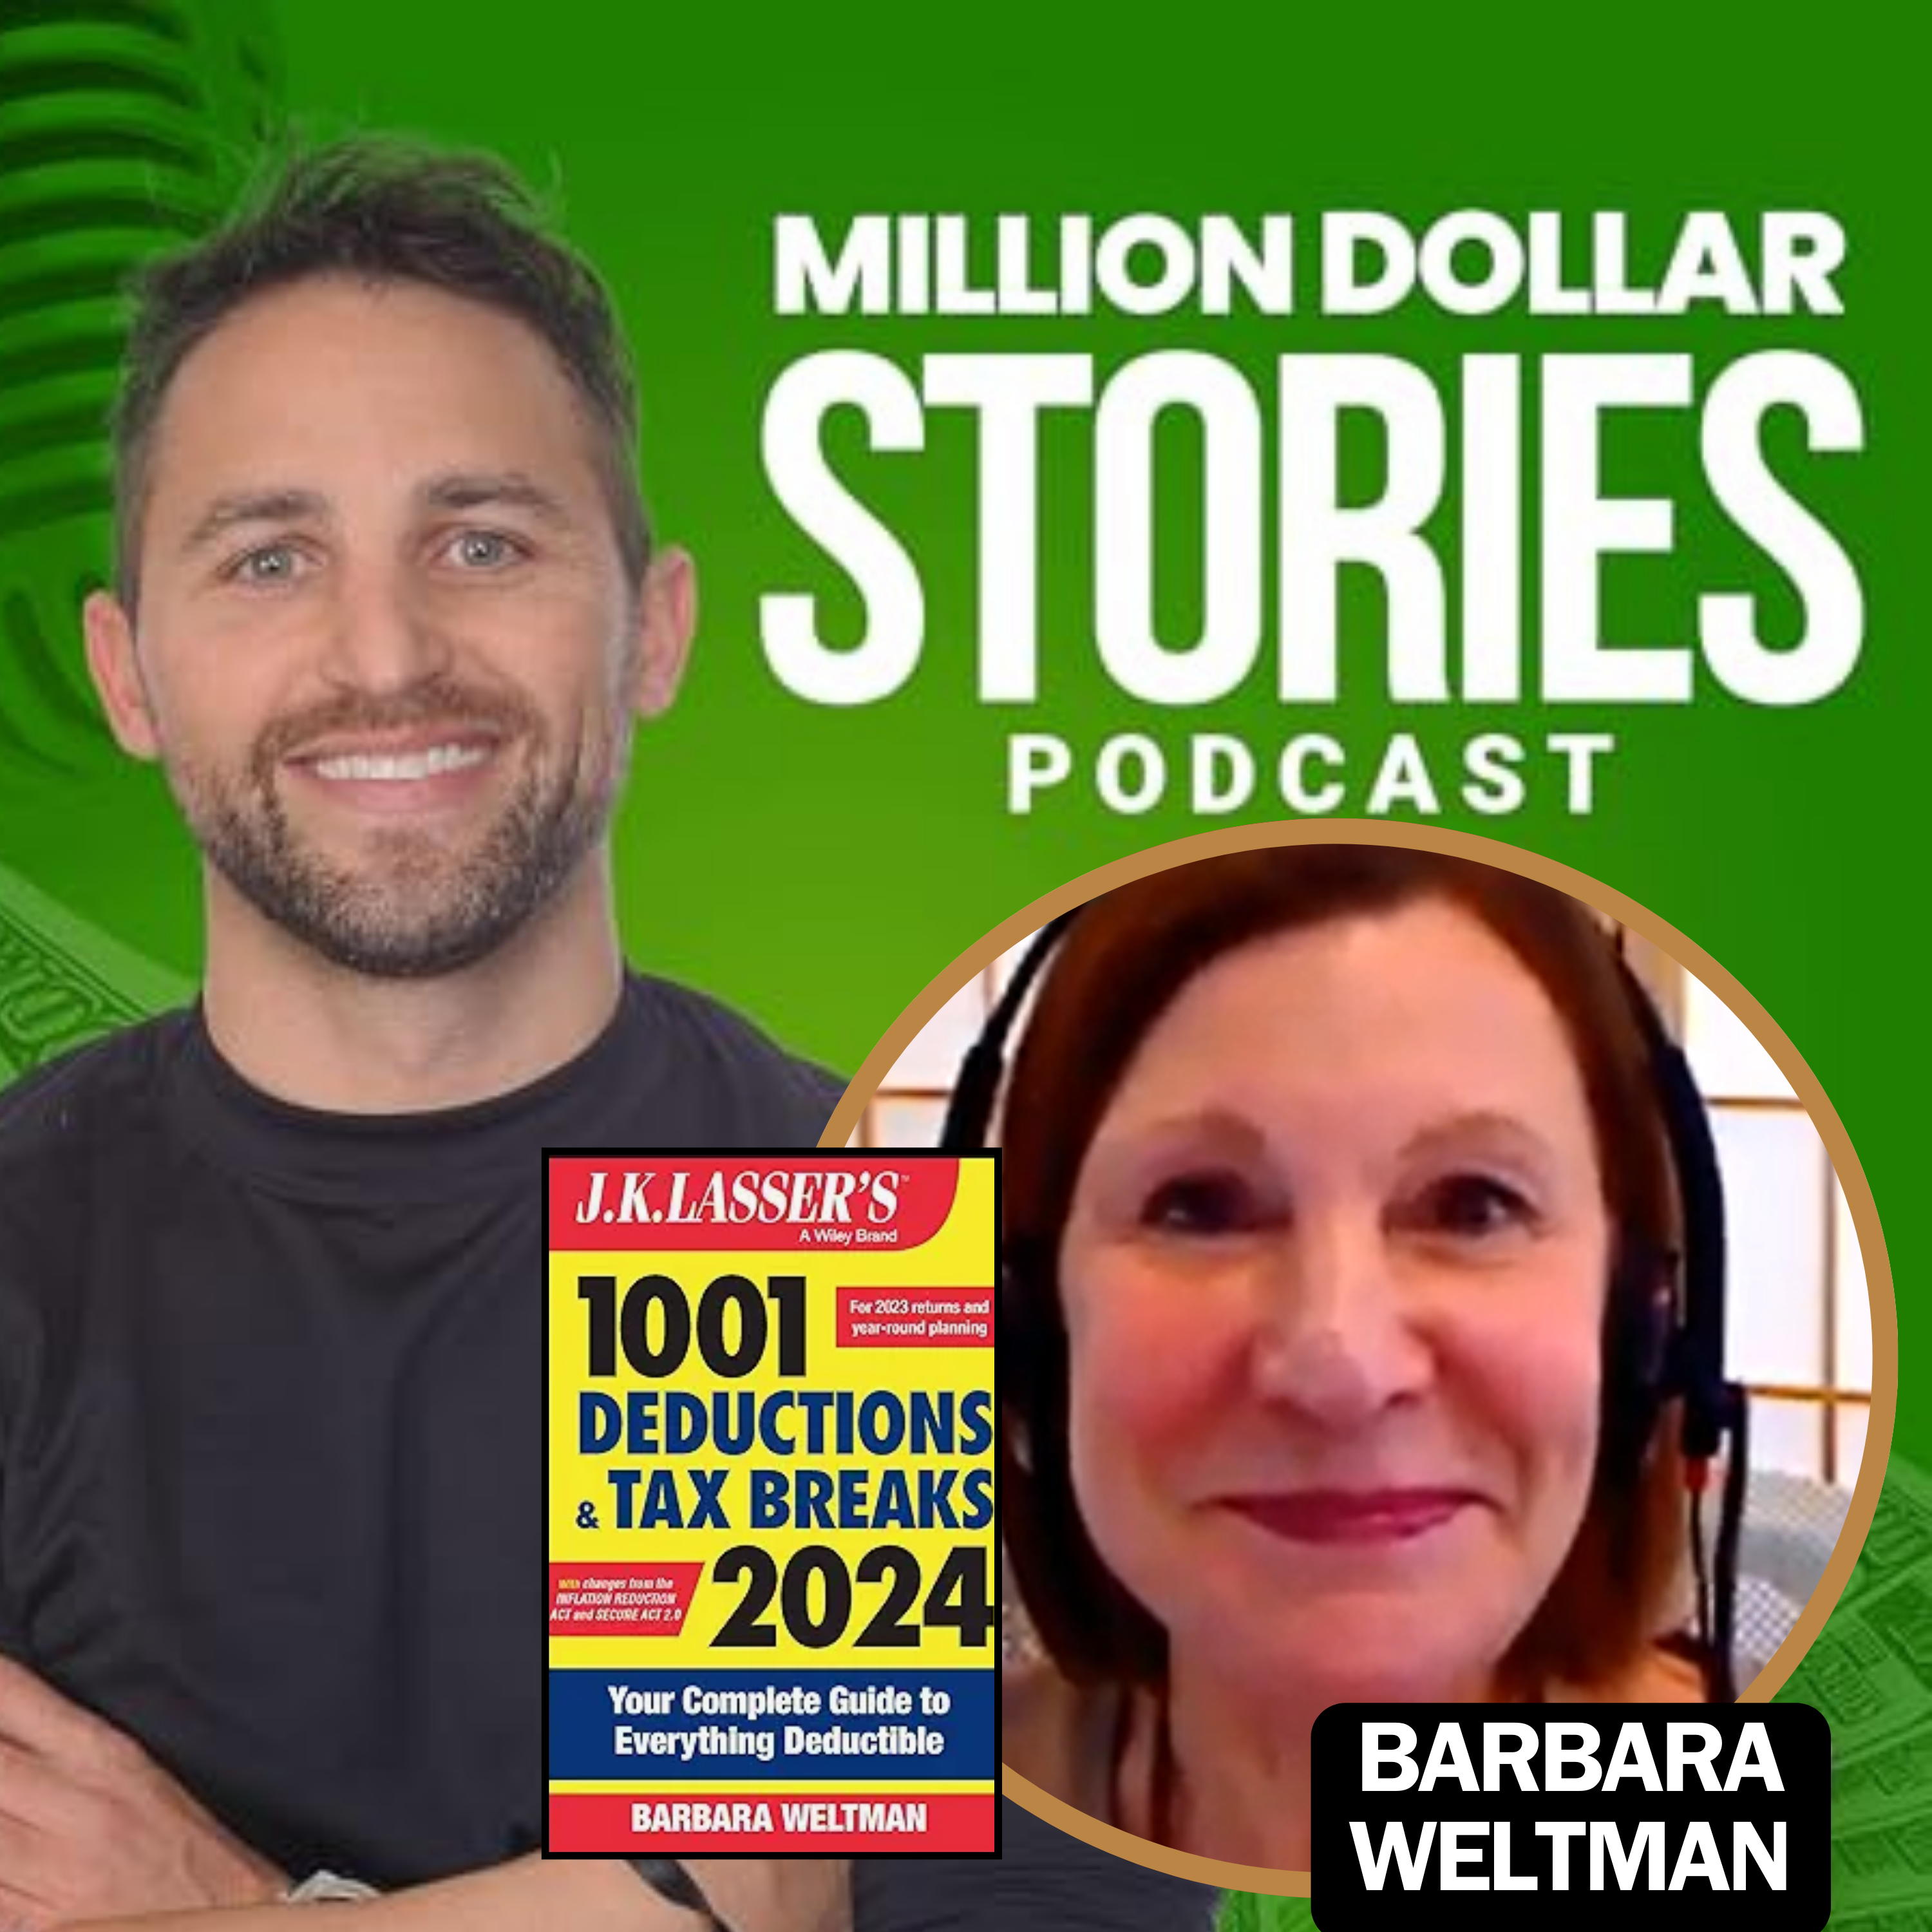 Barbara Weltman – Author of “Small Business Taxes 2024”